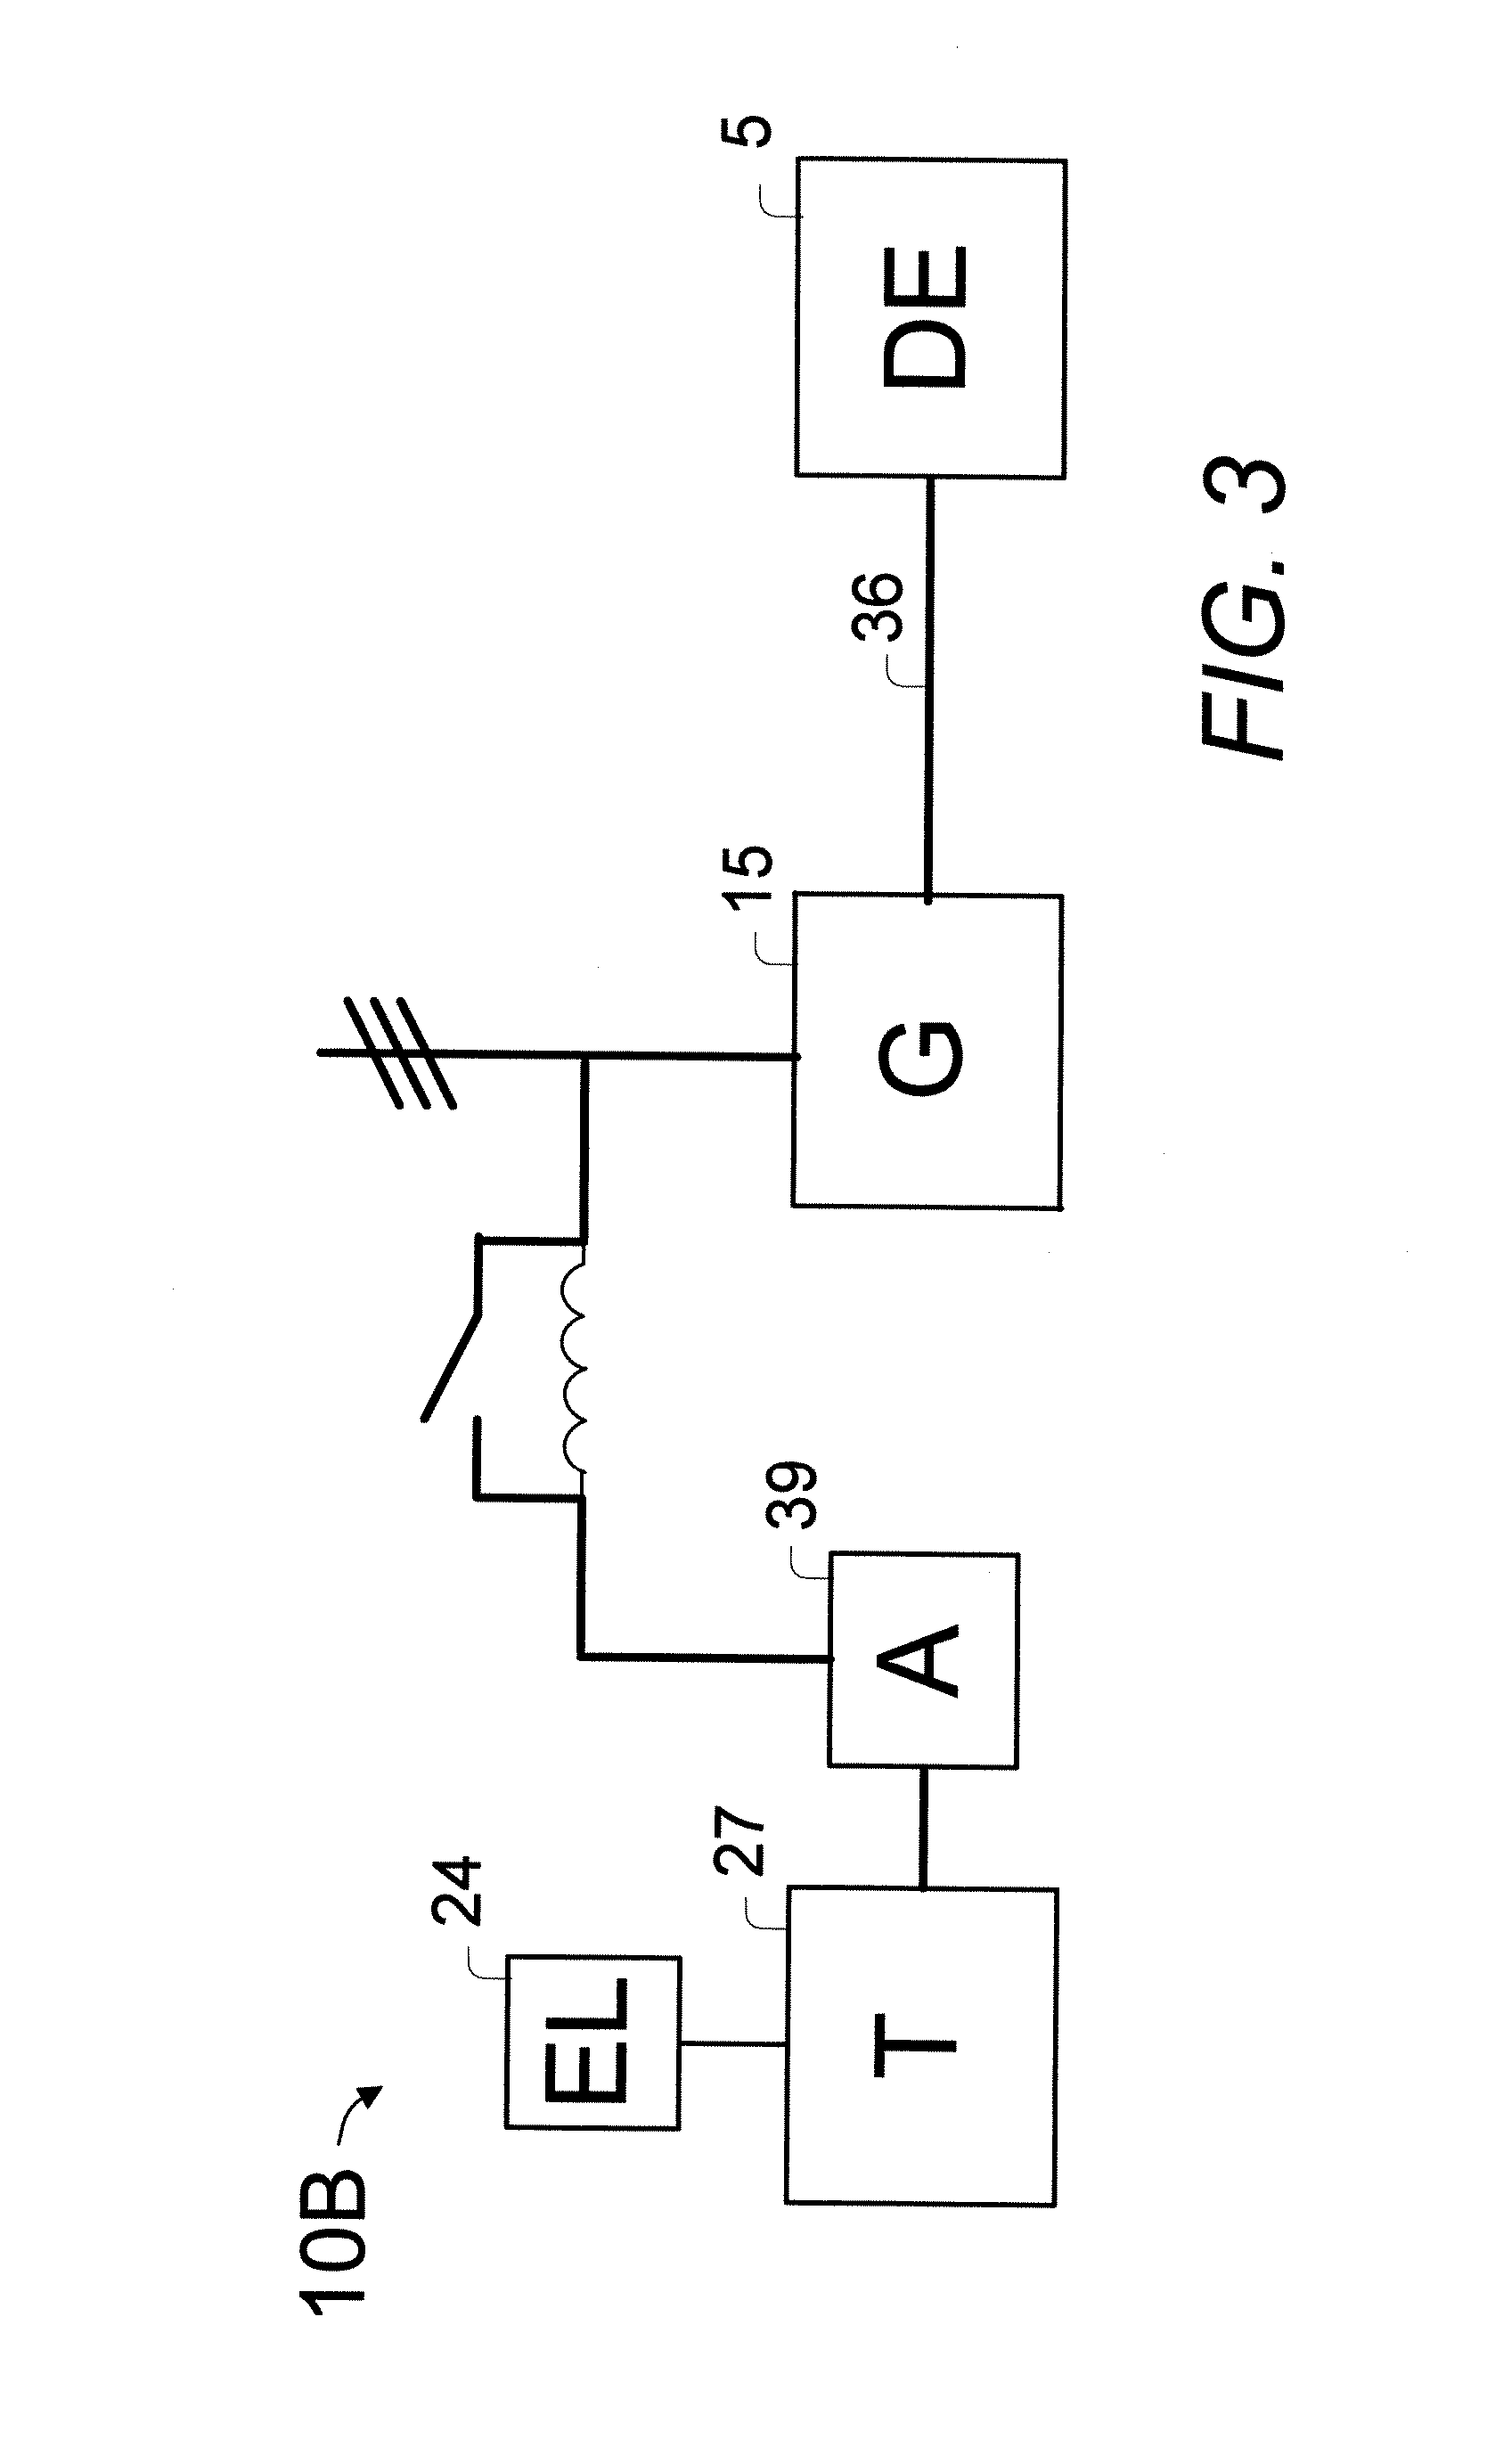 Integrated engine generator rankine cycle power system